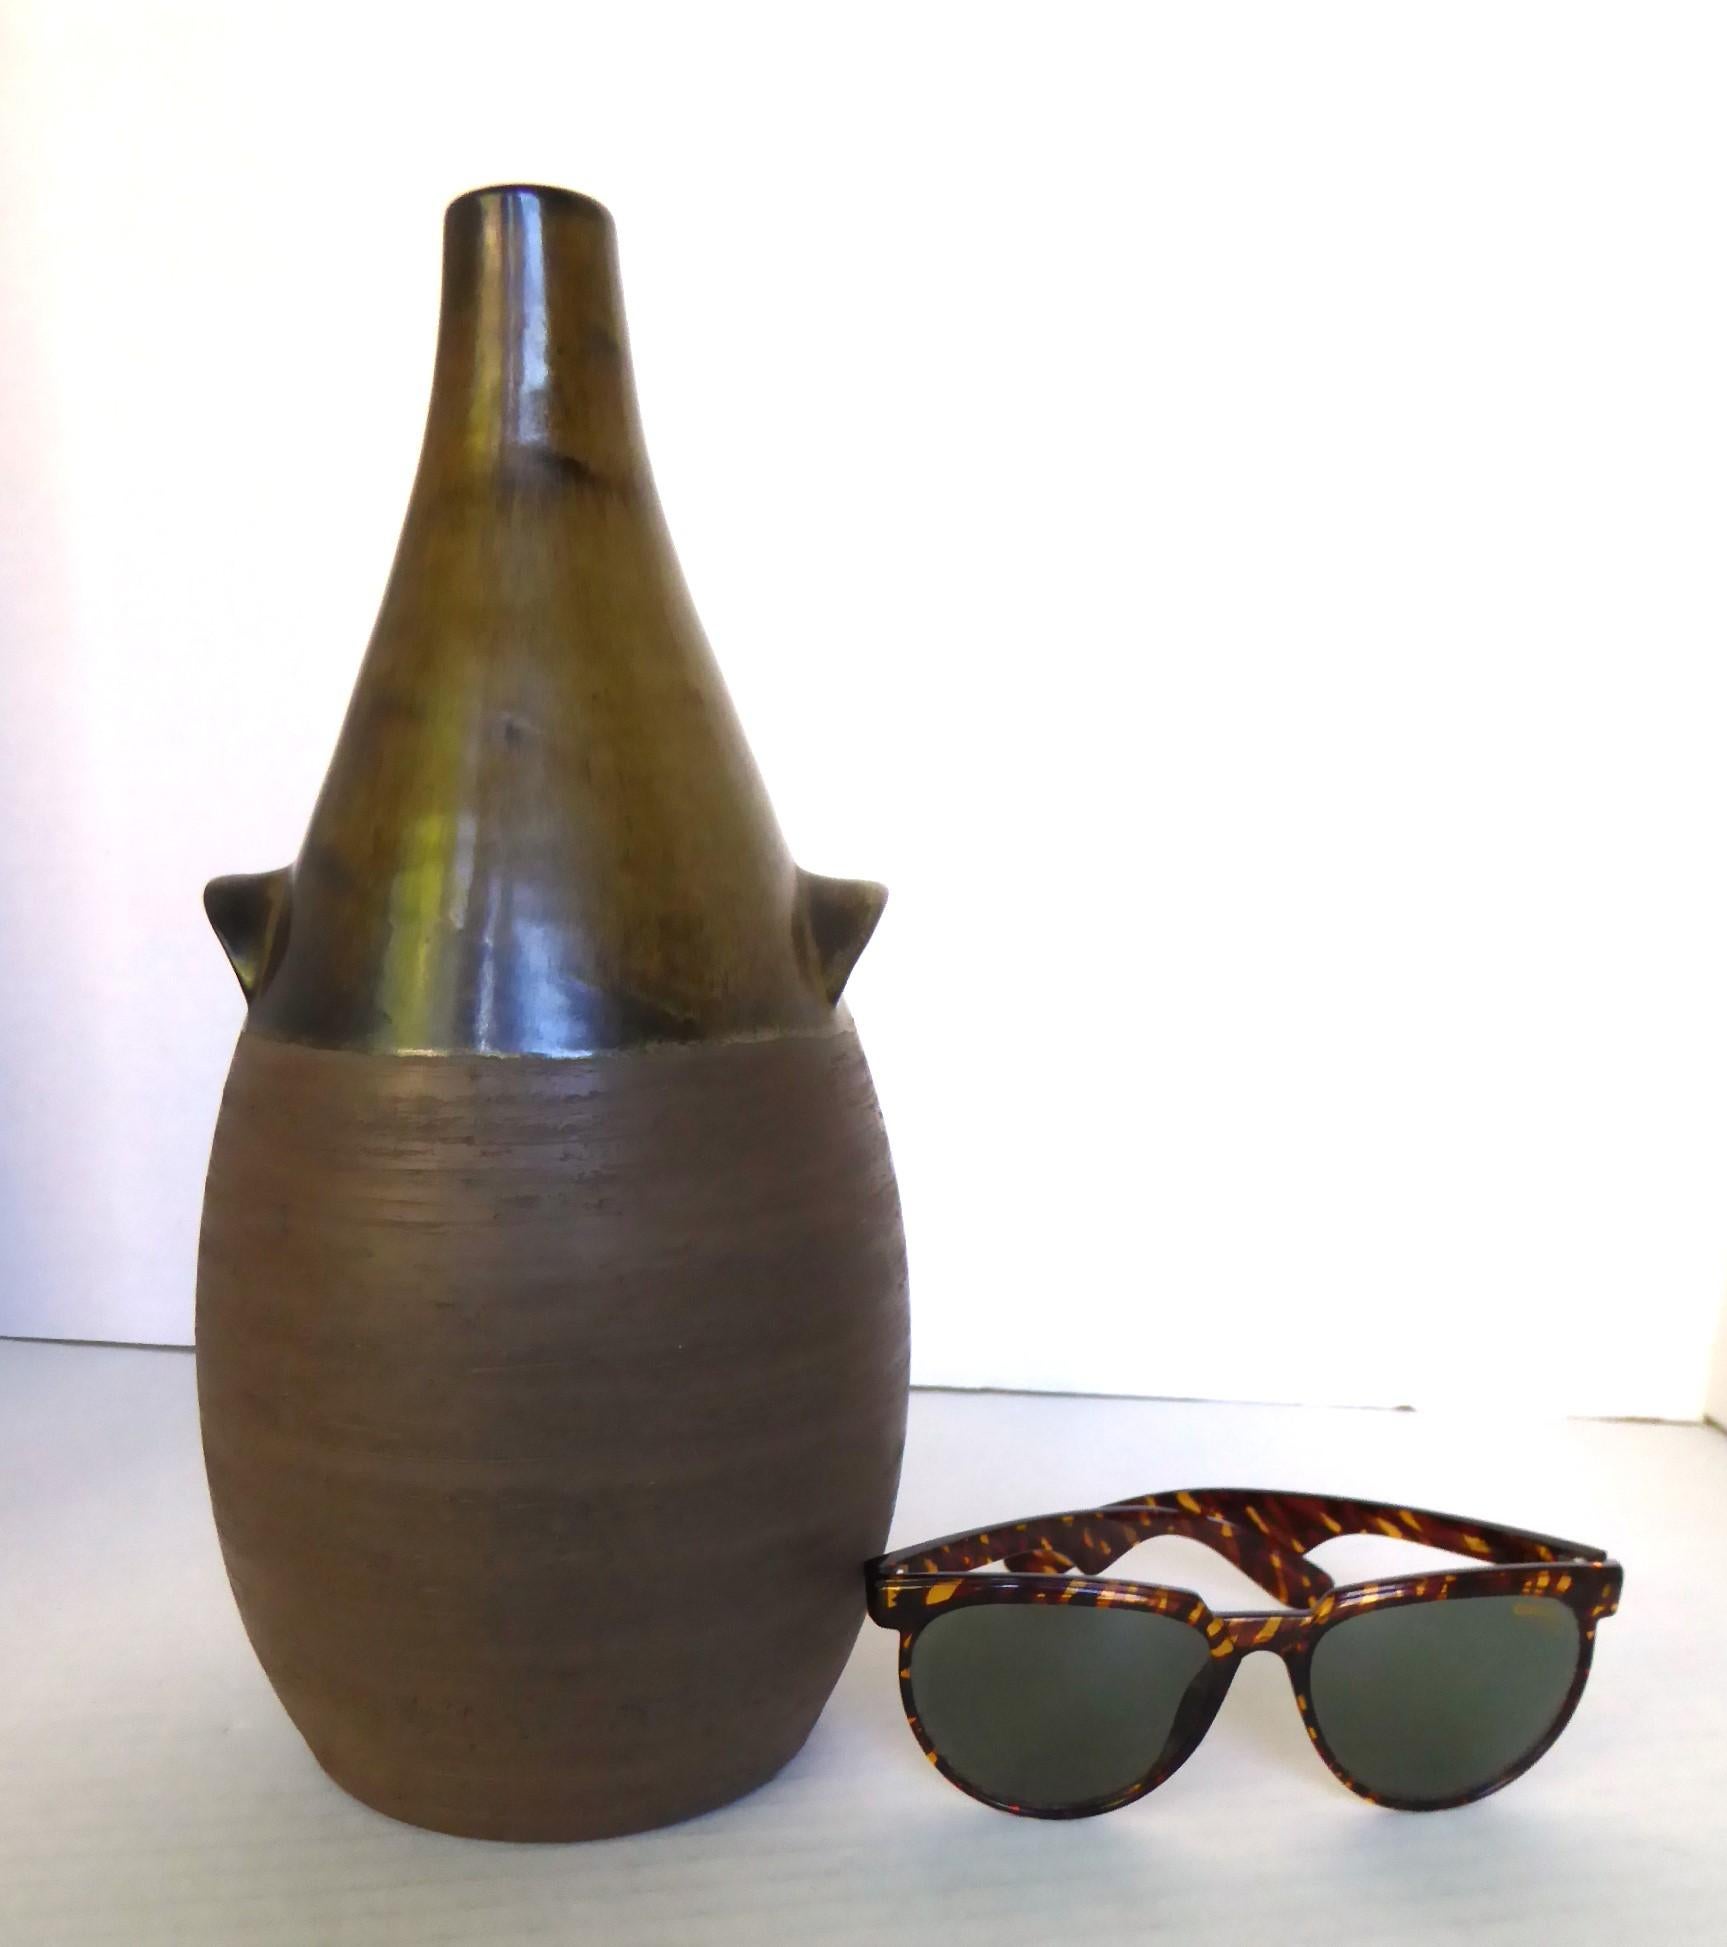 Danish Mid Century Modern wholesaler of ceramics BR (Brothers Rasmussen) had this beautiful Organic pottery vessel designed and created.  This piece has a jug form and has a textured unglazed bottom half while the neck is finished in a spotted olive